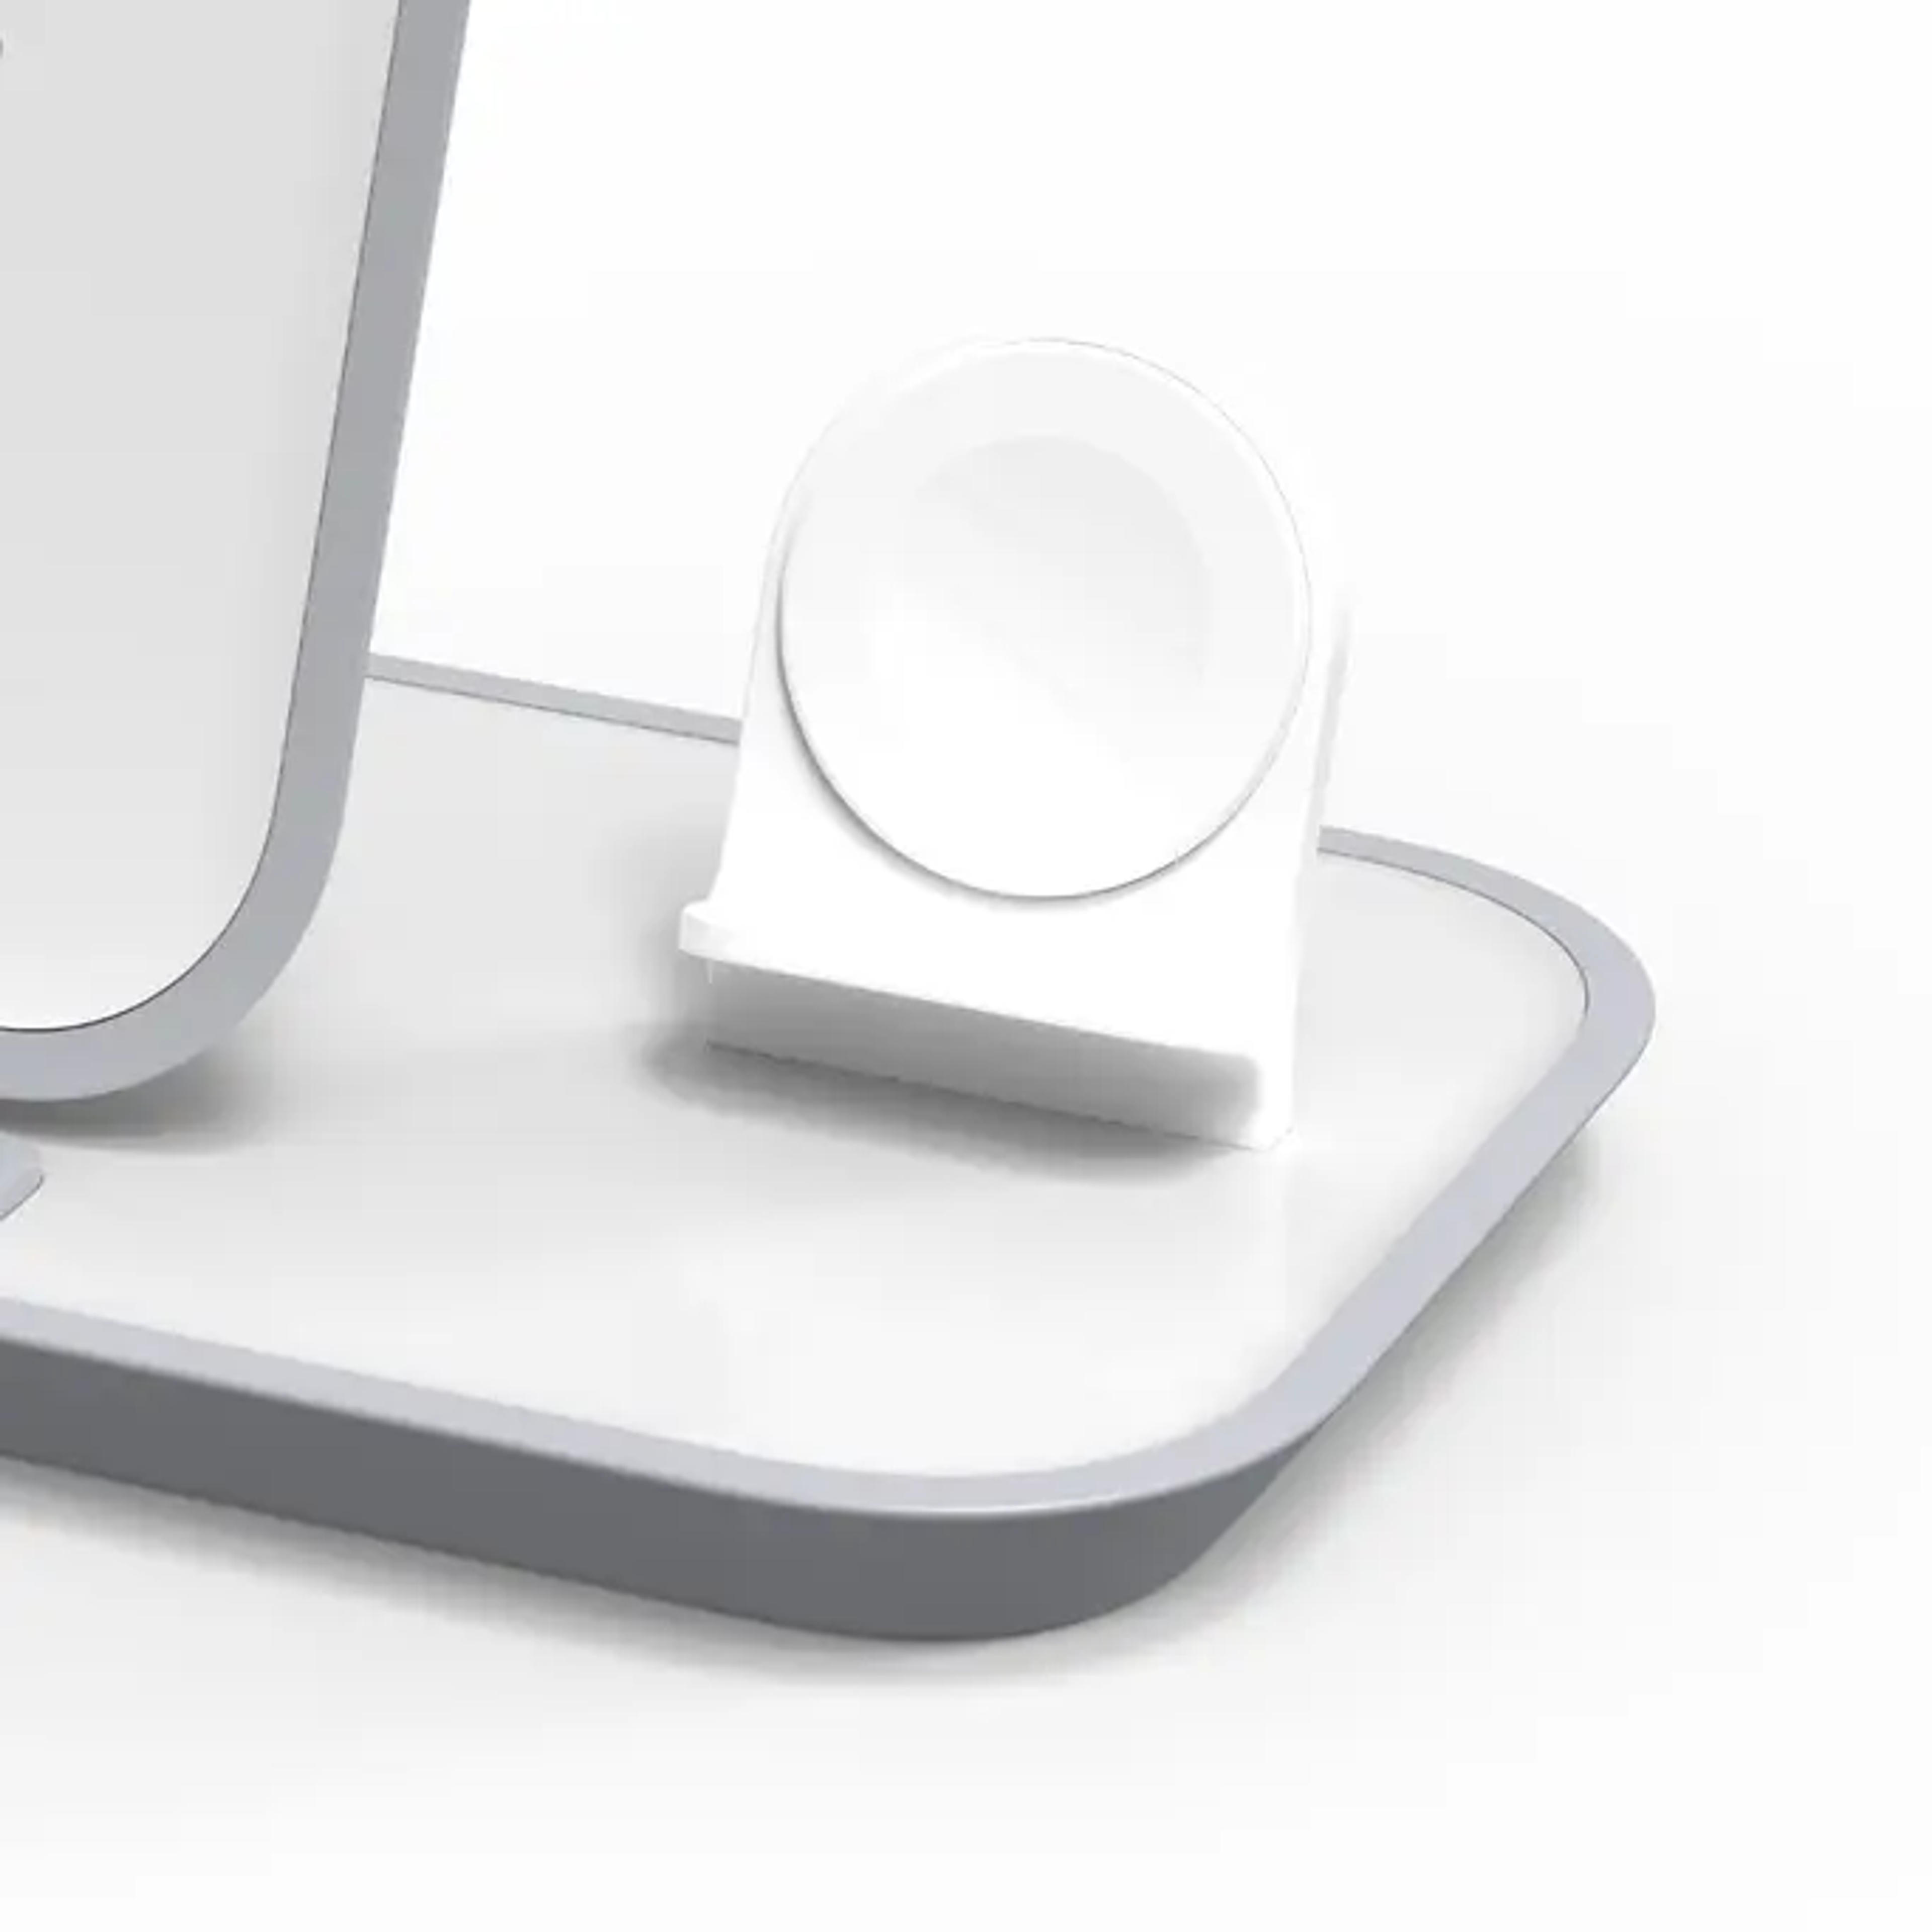 3-in-1 wireless charging stand